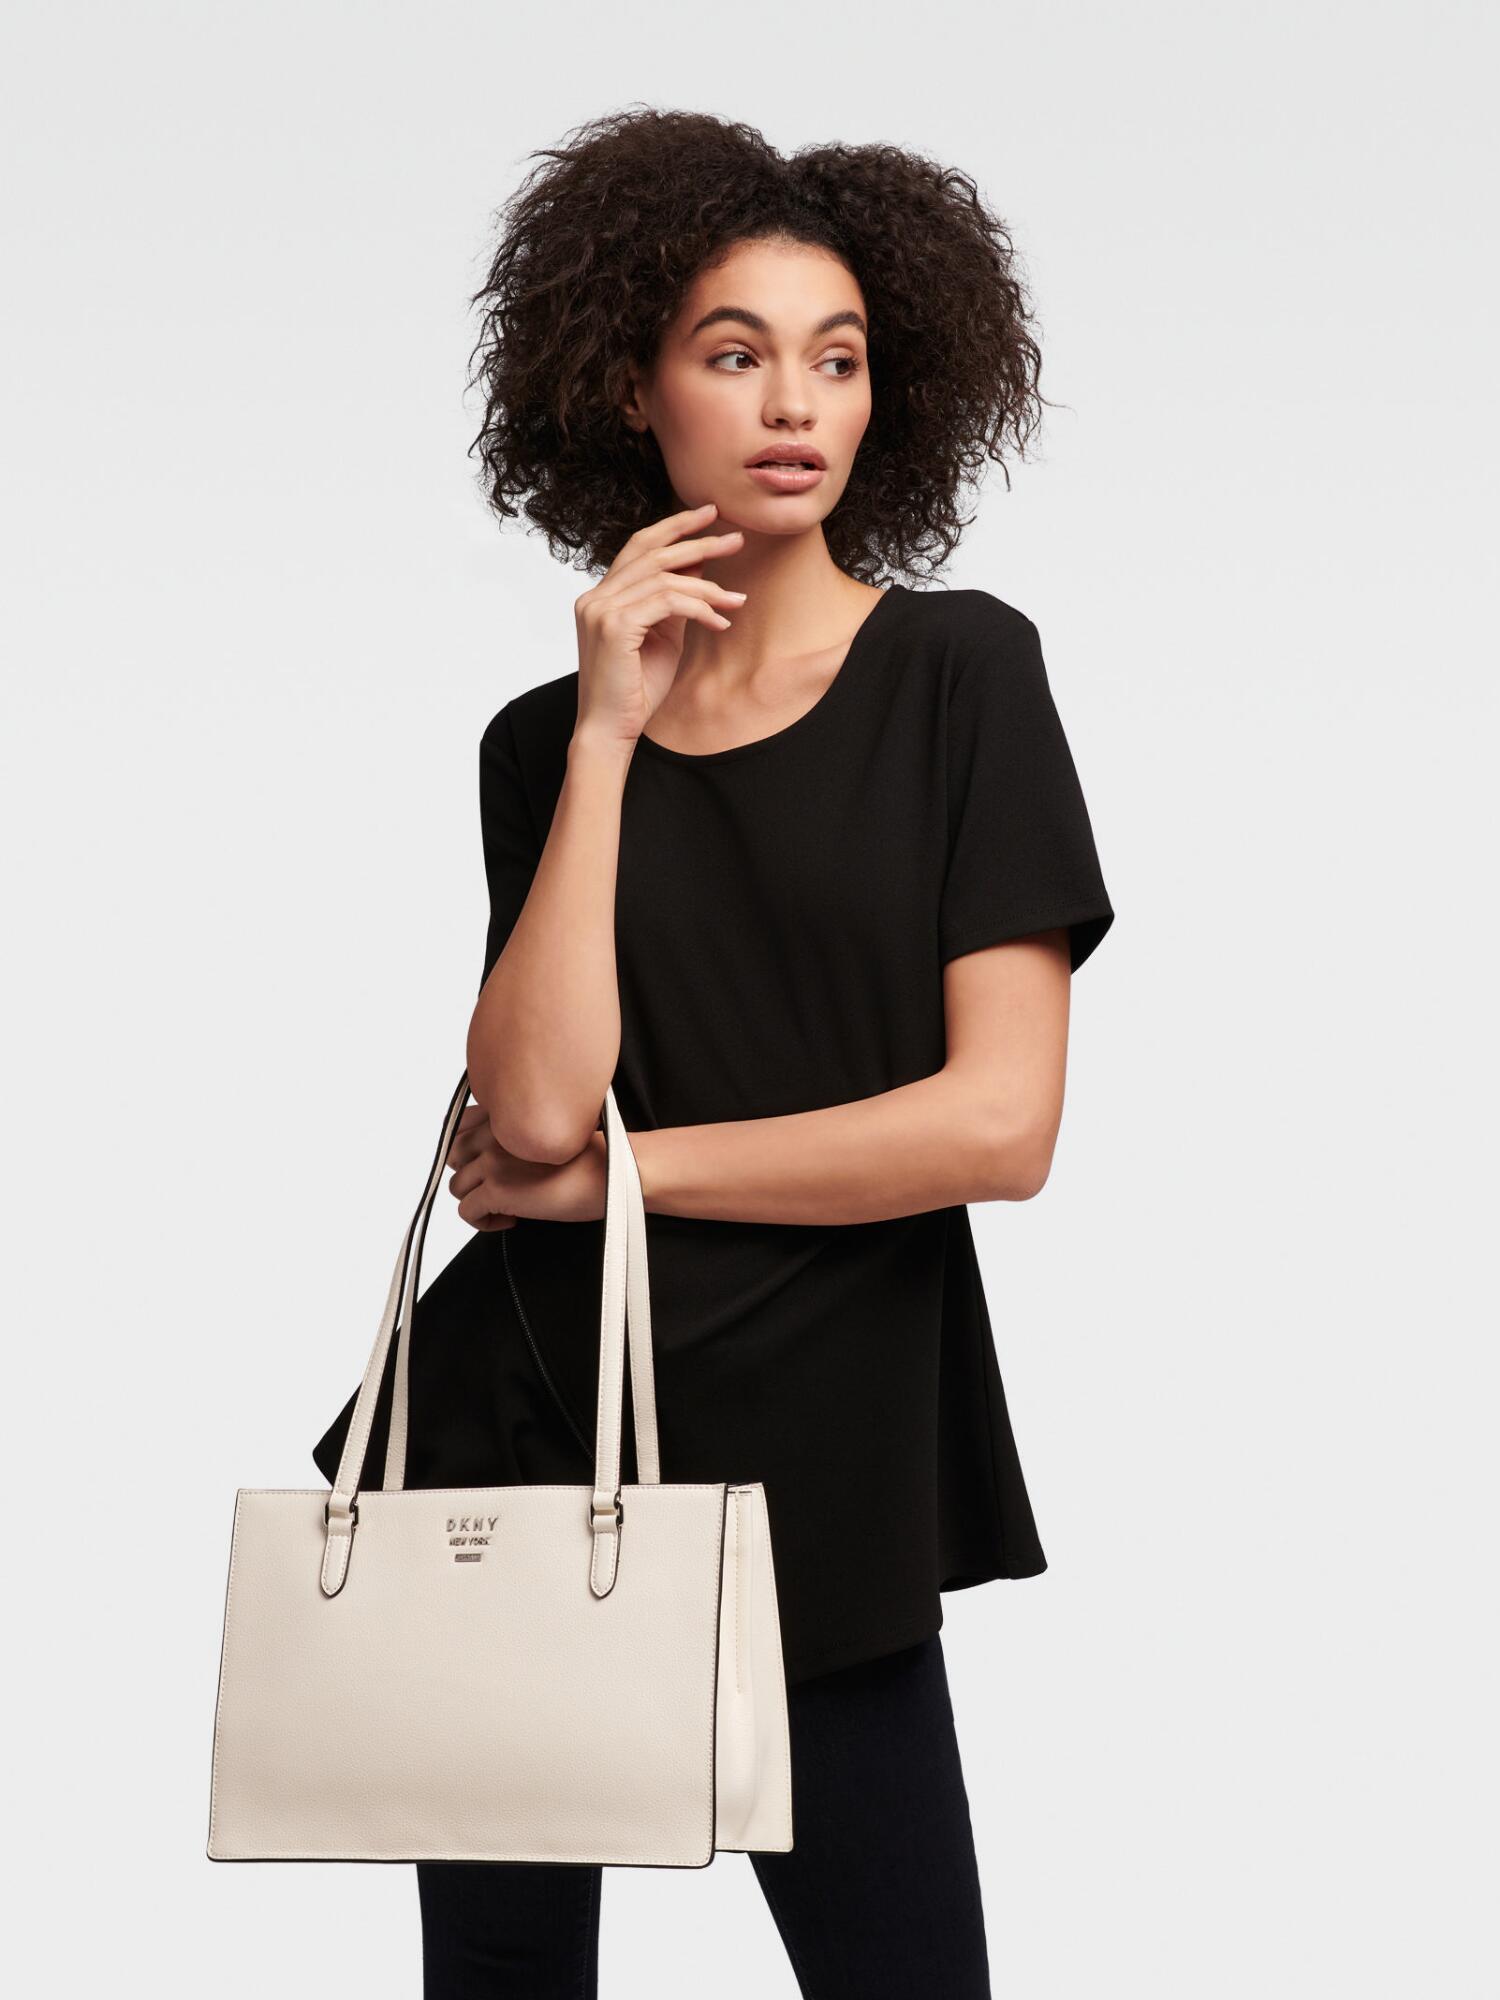 dkny whitney leather tote